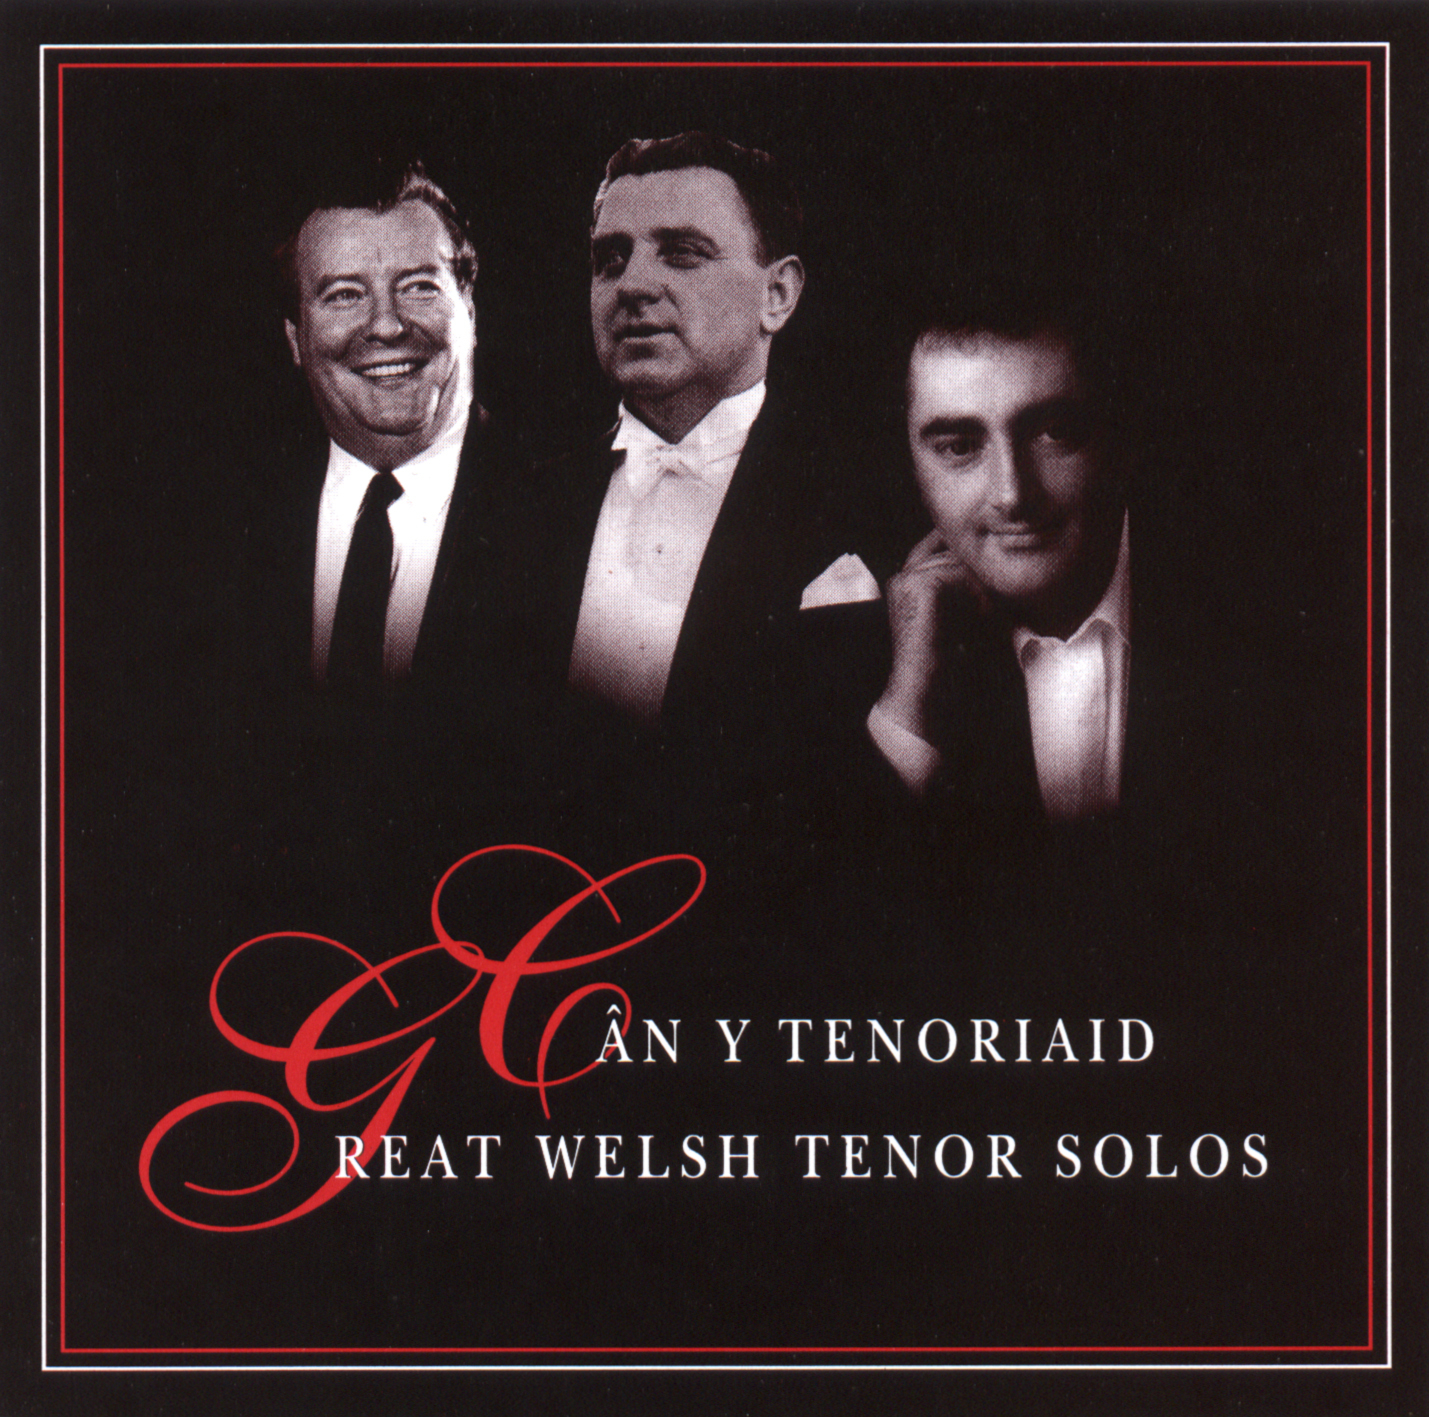 Can Y Tenoriaid / Great Welsh Tenor Solos